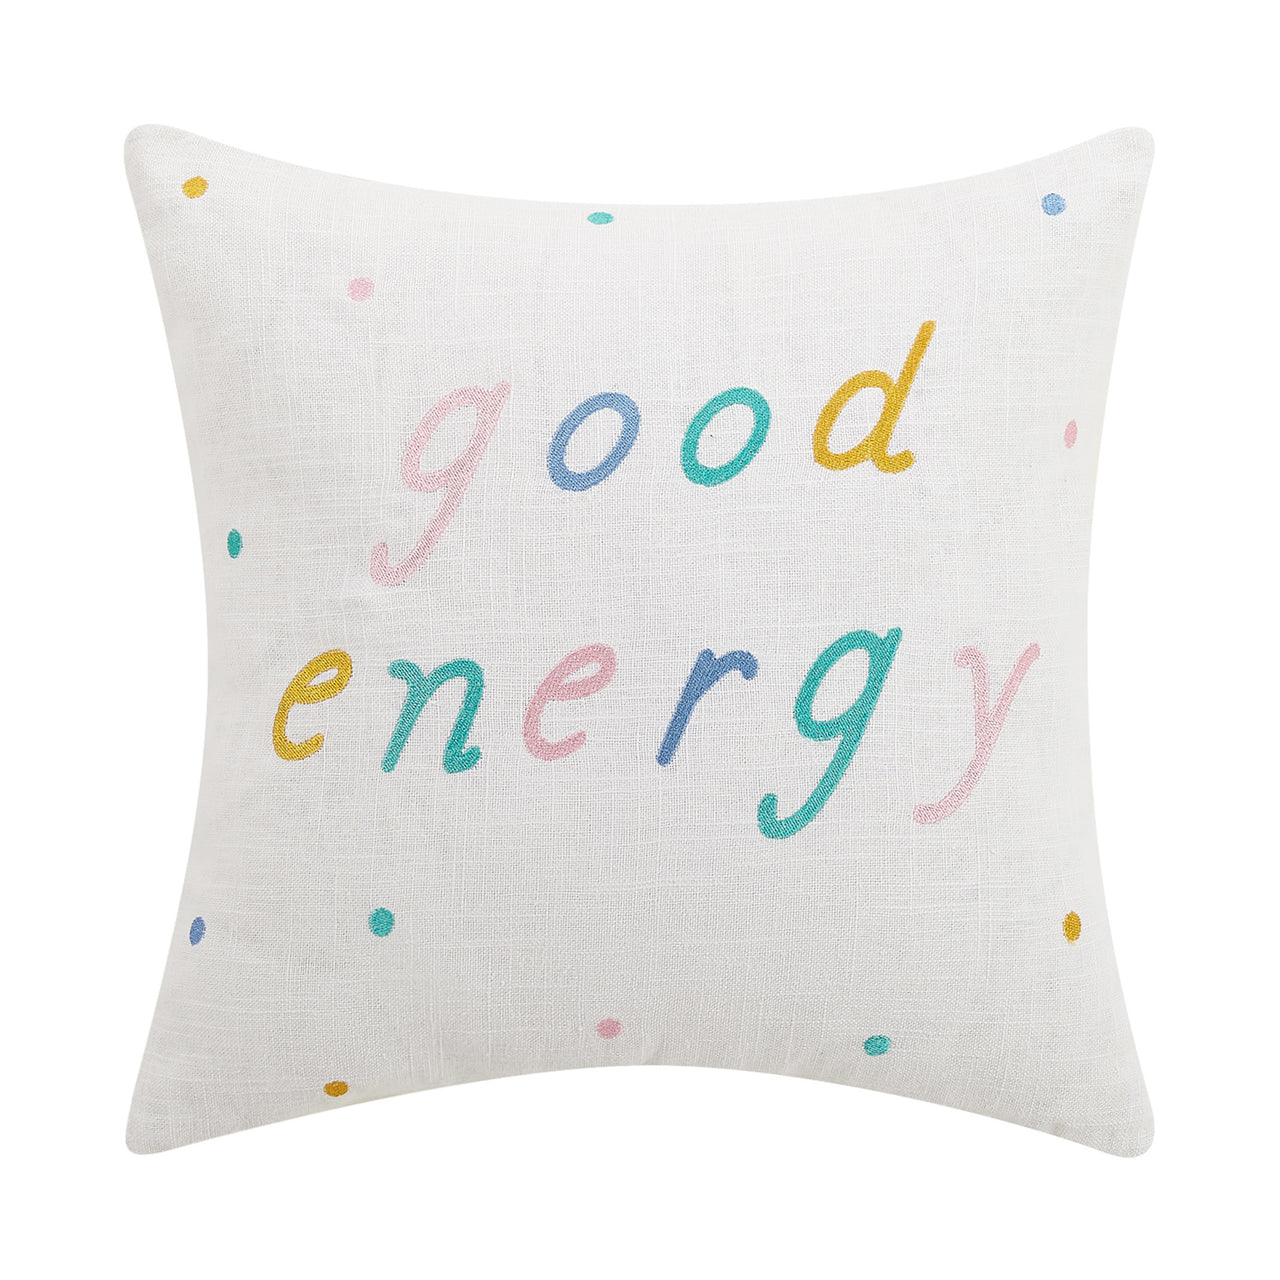 Good Energy Embroidered Pillow, 16"x16"